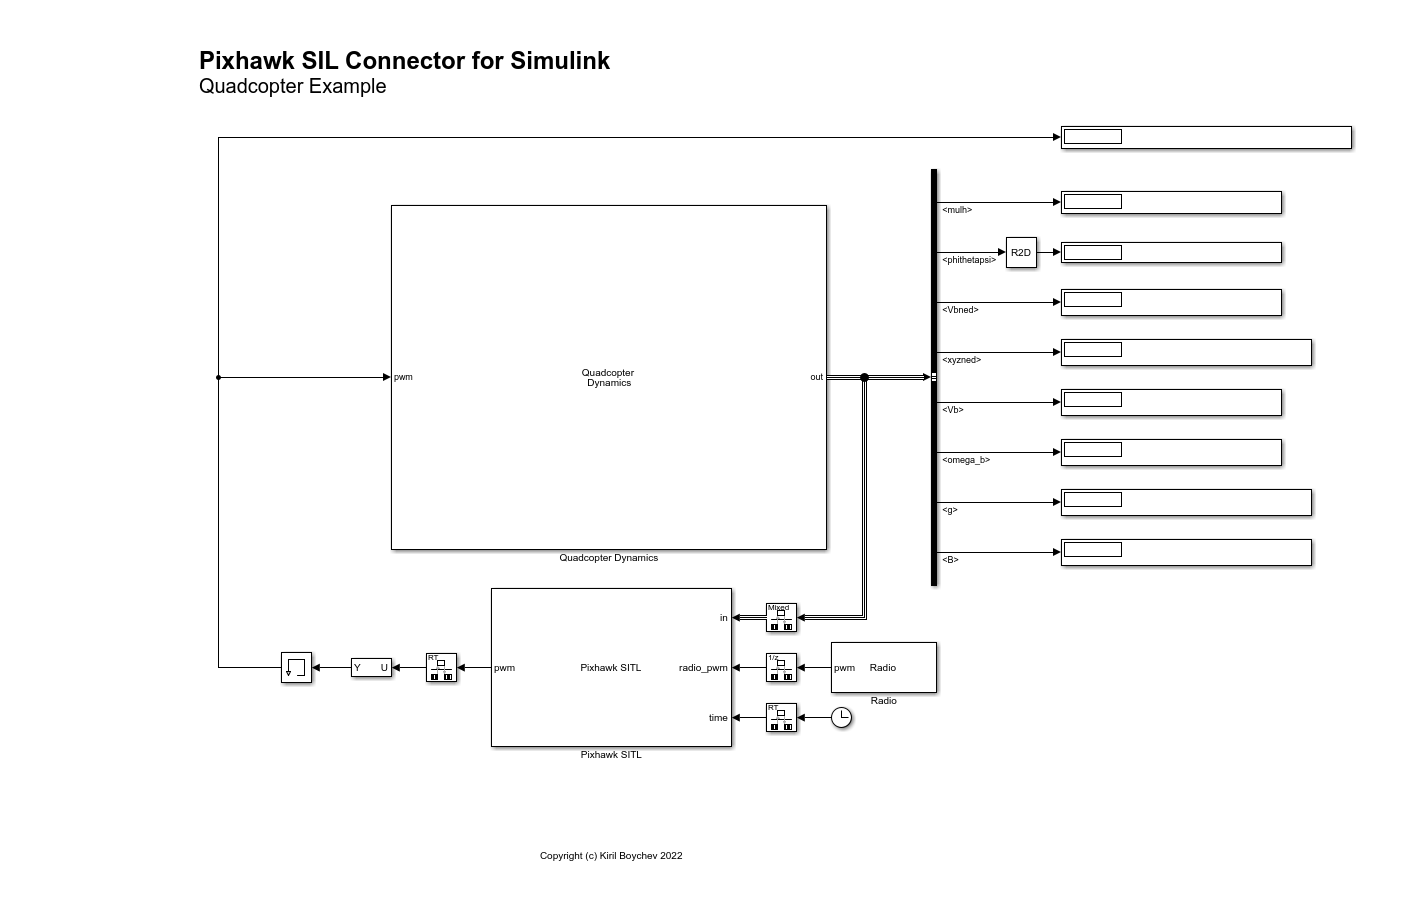 Pixhawk SIL connector example